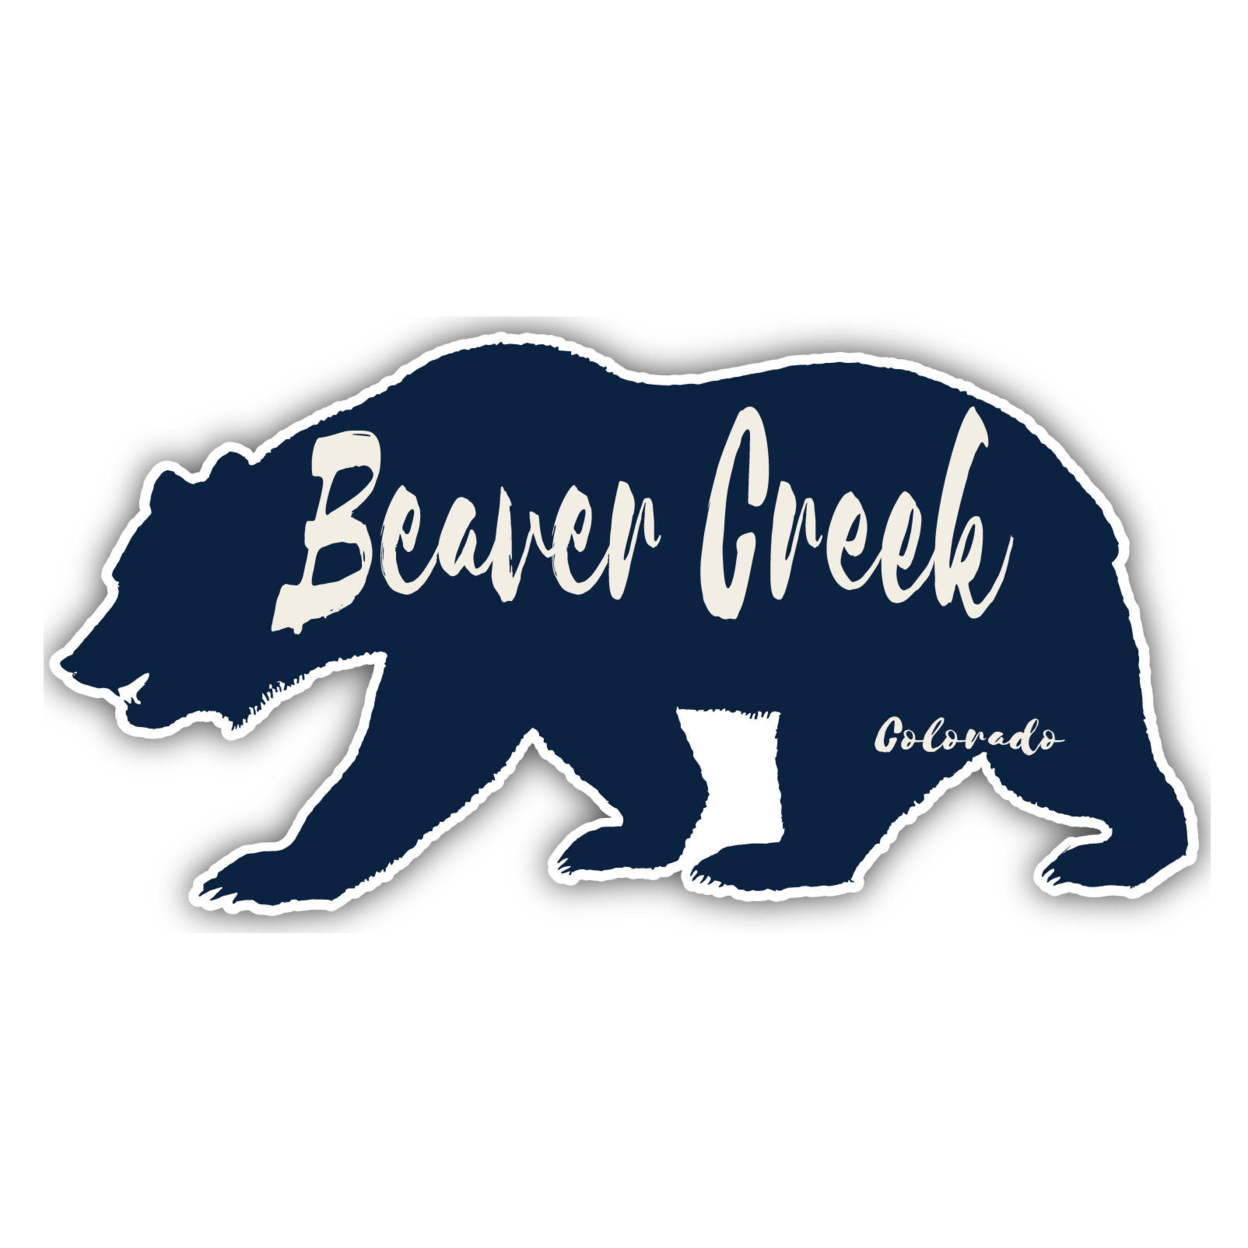 Beaver Creek Colorado Souvenir Decorative Stickers (Choose Theme And Size) - 4-Pack, 6-Inch, Great Outdoors